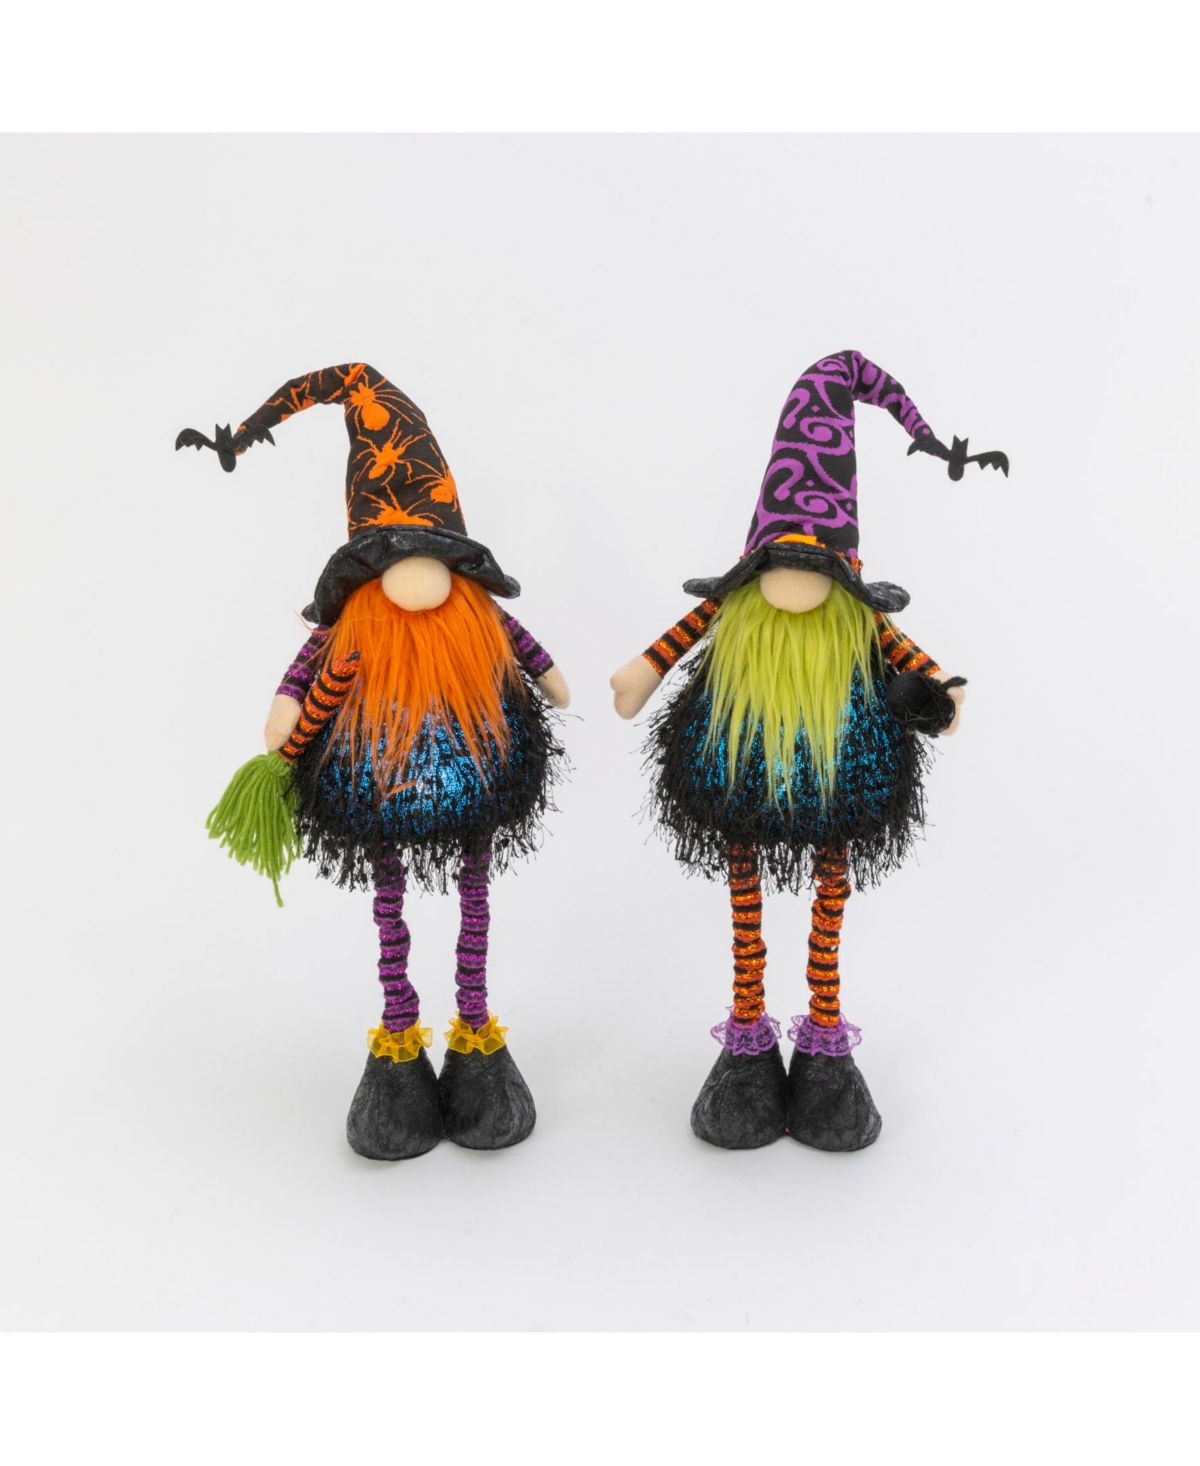 Gerson International Set Of 2 Lighted Plush Standing Spooky Halloween Gnomes In Multicolor